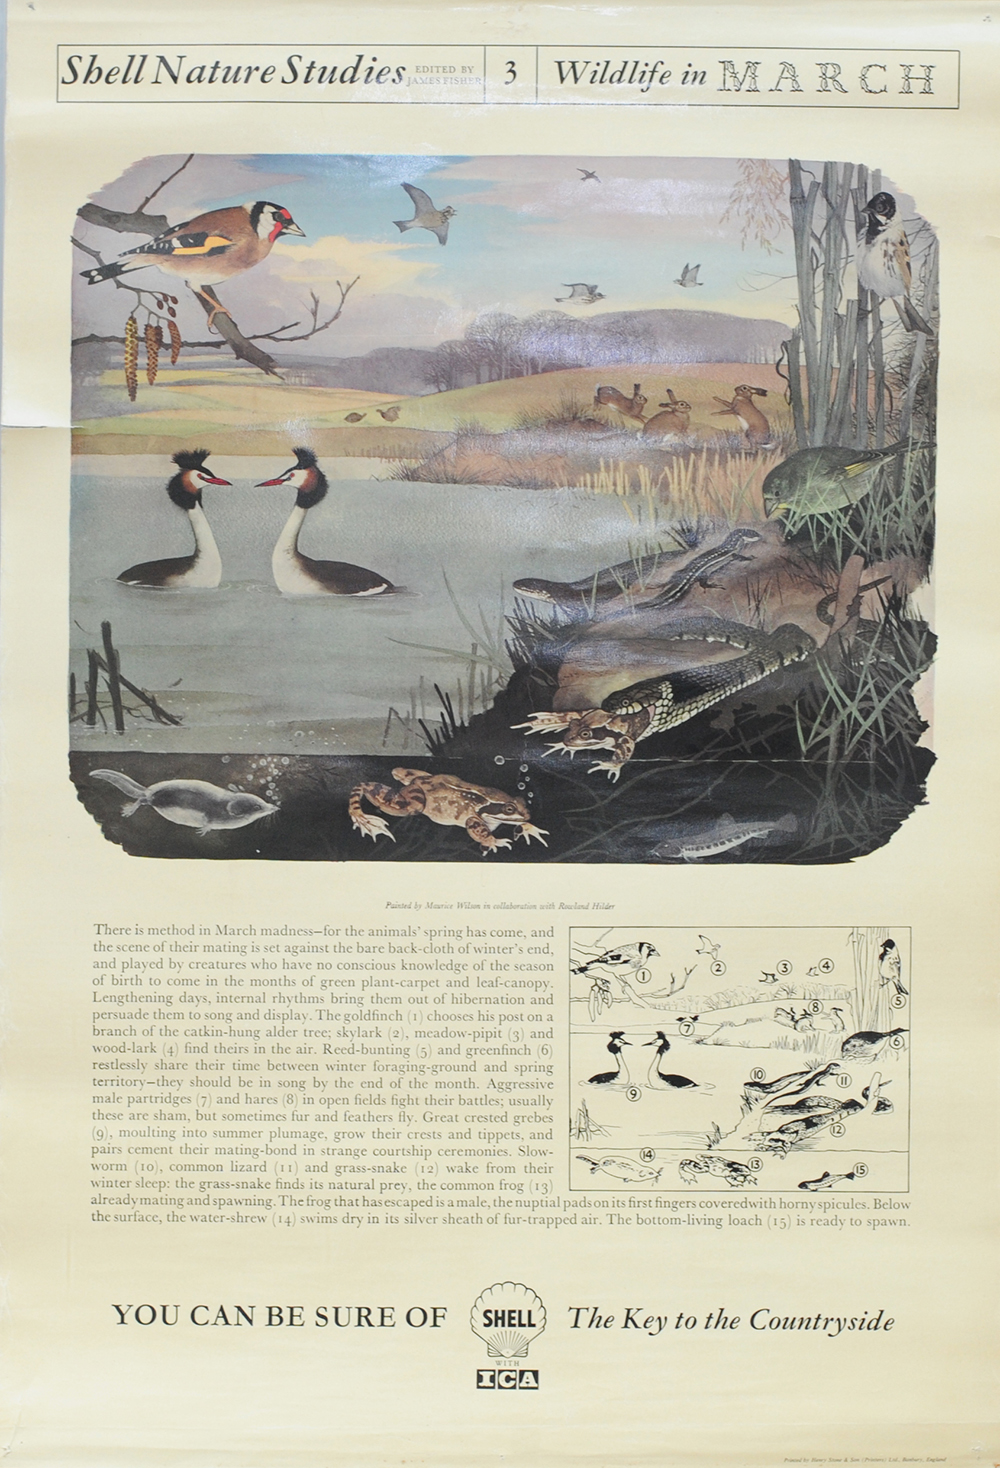 Shell Poster qty 12 'Shell Nature Studies' numbers 1 to 5 and 8 to 12 (duplicated No 2) and also '